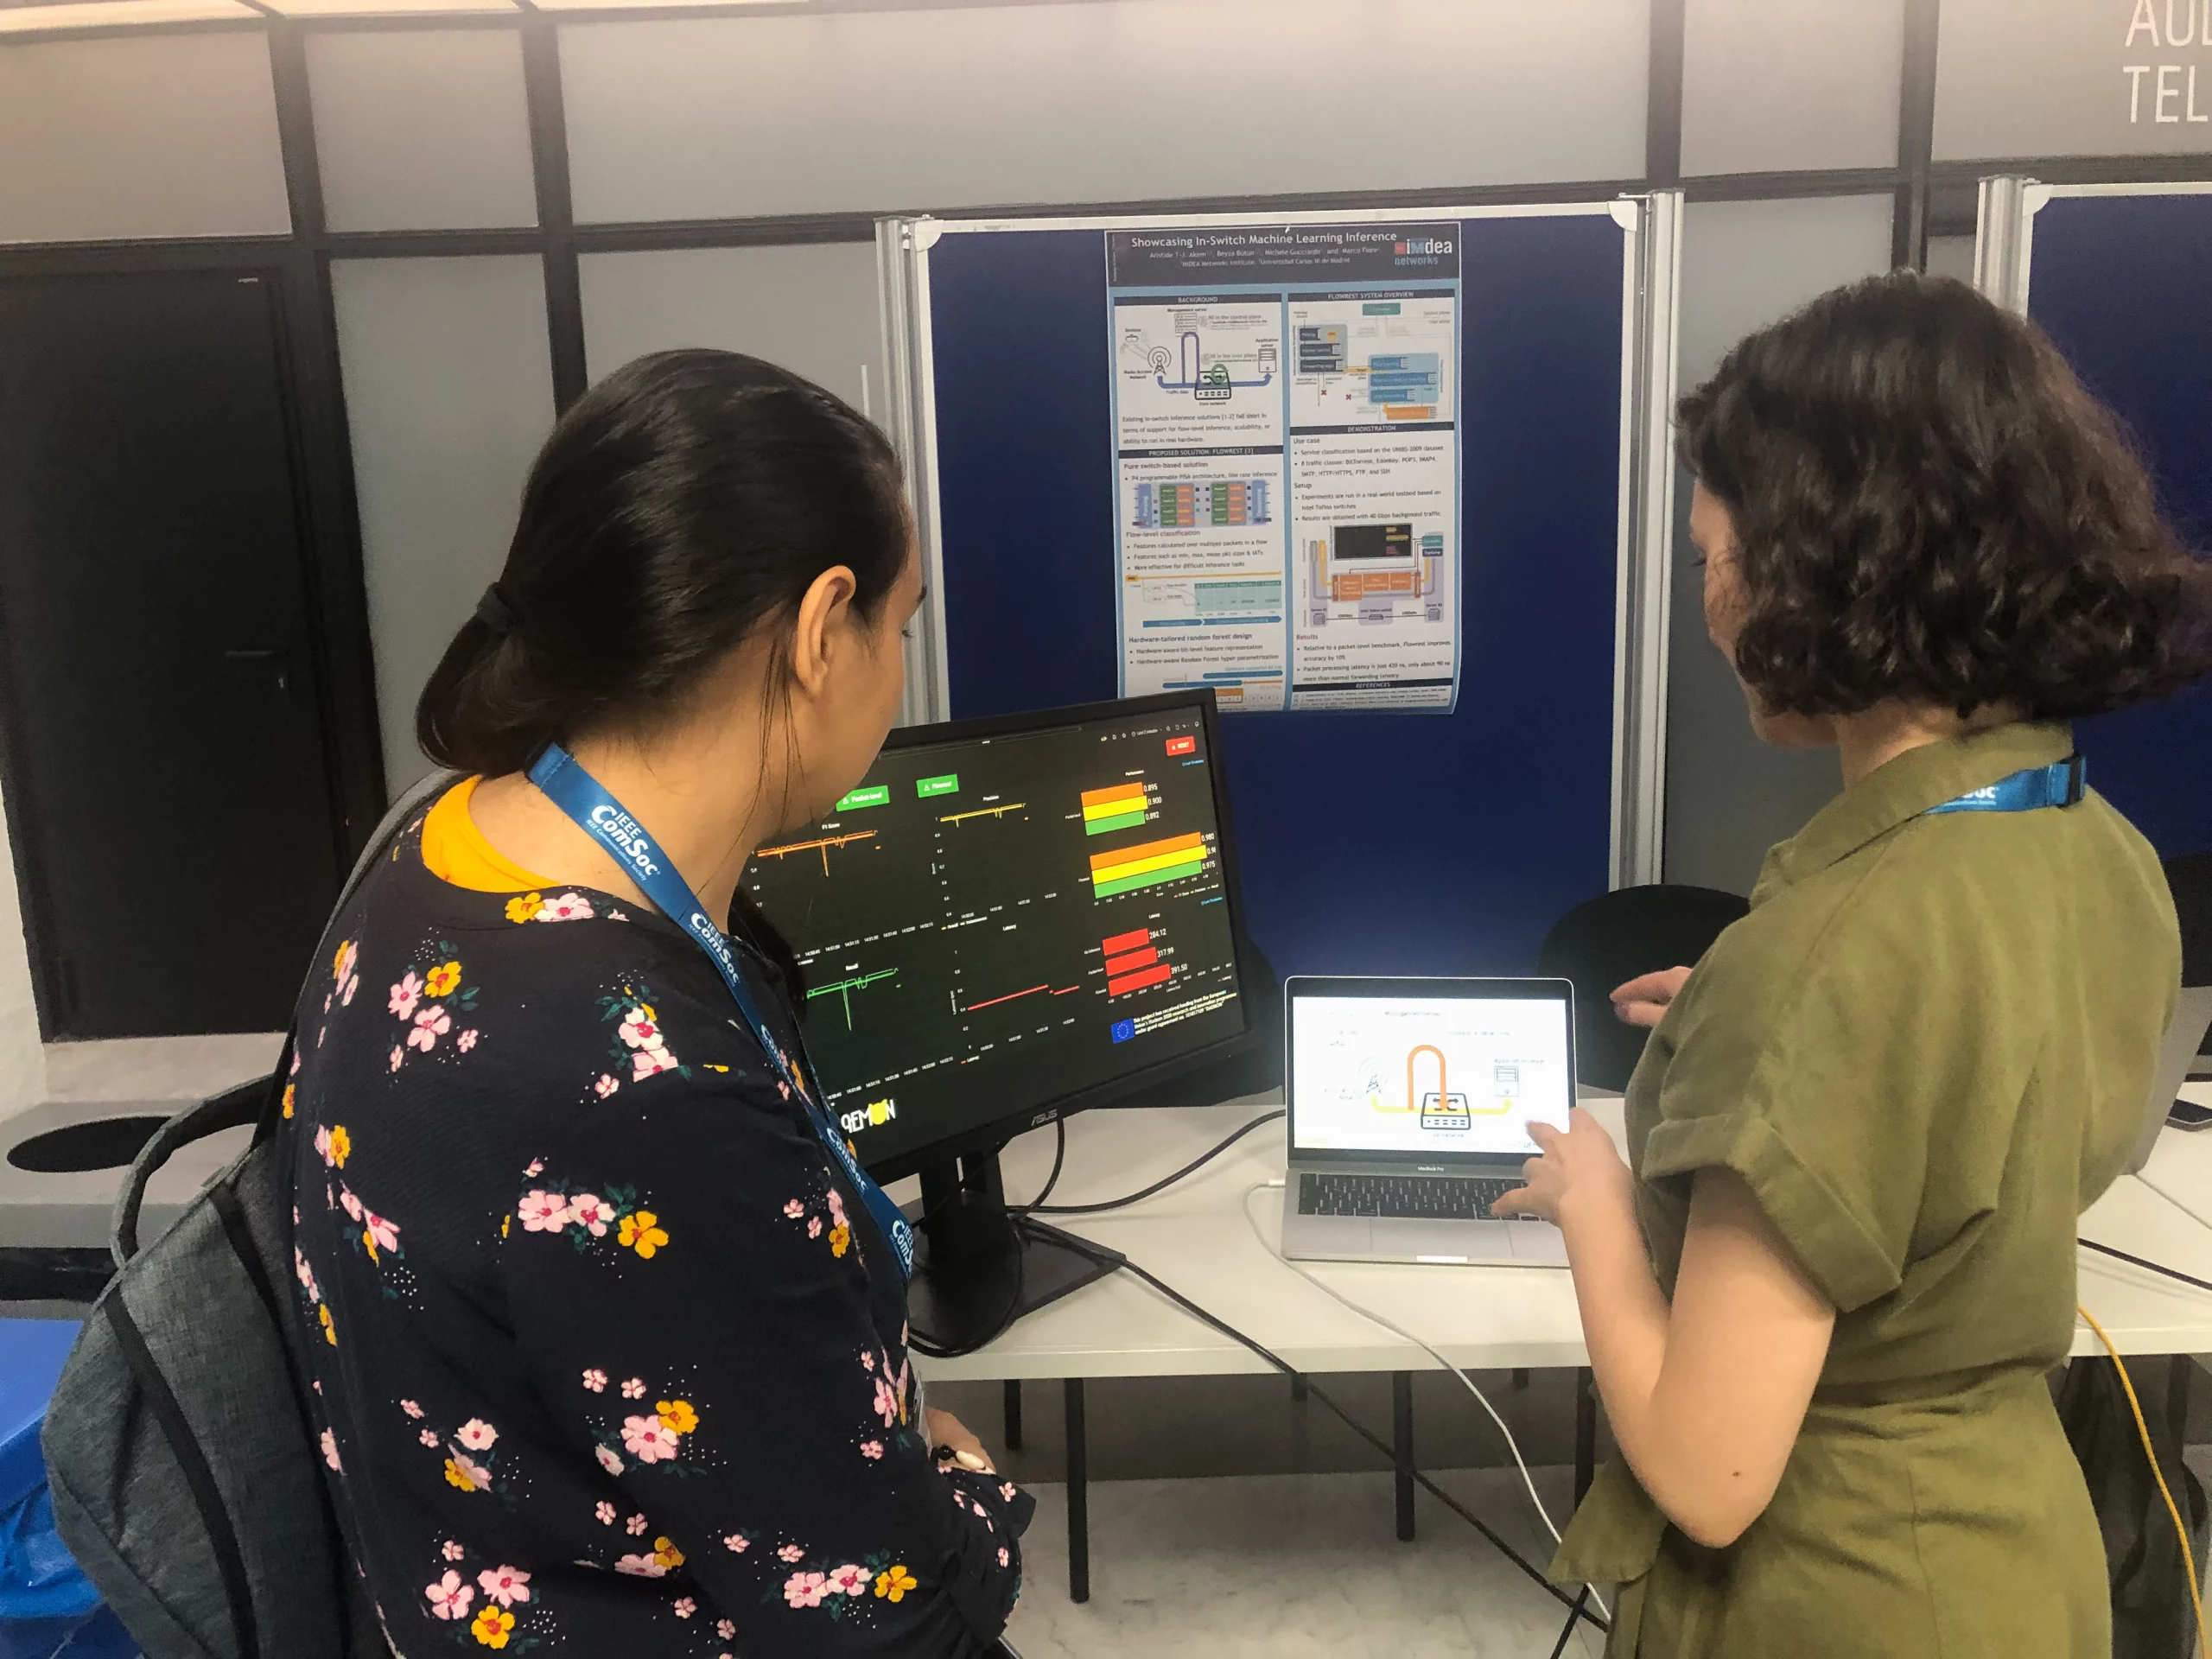 NEW @h2020daemon from @IMDEA_Networks showcasing “Flowrest Demo" at IEEE International Conference on Network Softwarization @ieee_netsoft 2023 in Madrid, Spain. Available at @ZENODO https://doi.org/10.5281/zenodo.7550150 #h2020daemon #H2020 @EU_H2020 @5GPPP